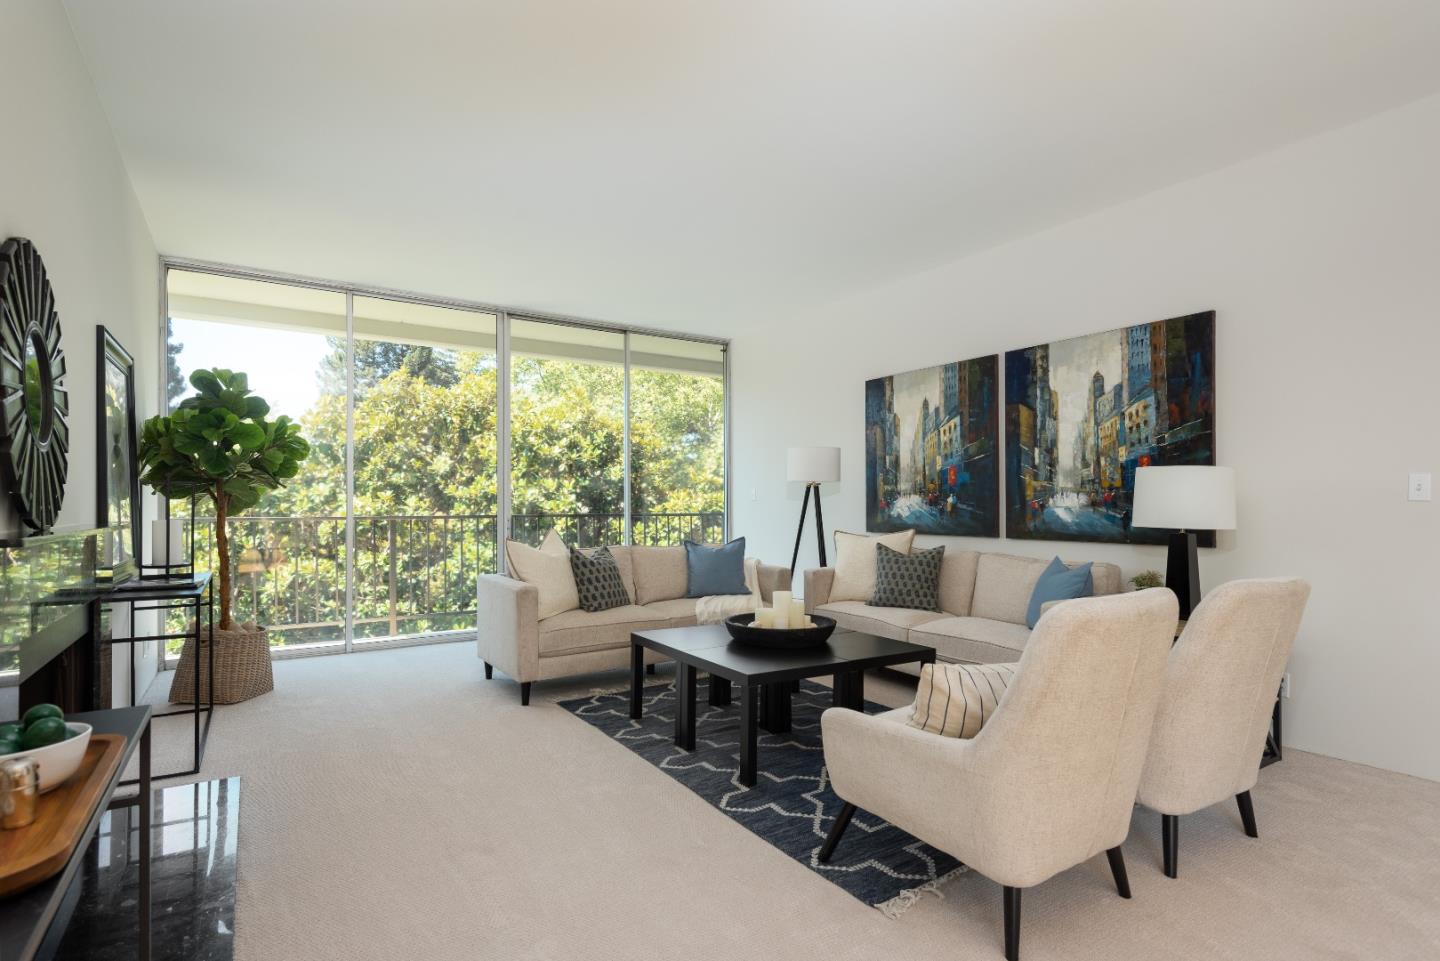 Plush turn-key gem!  Showered in natural light, this luxurious 1935+/- sf 2 bd/2 ba condo with extra den/office space exudes peaceful tranquility among tree-top views.  Freshly painted interiors and new carpeting/vinyl highlight the high ceilings, tall glass doors and windows bringing the outside in, with a large, private balcony offering alfresco seating.  Spa-like primary en suite boasts two separate sink areas, private dressing spaces, three large closets with built-in storage, and large shower/commode room.  Ample storage throughout, plus in-unit separate laundry room.  Secure building with lobby concierge, deeded one car underground parking and storage, community pool, BBQ area, gym, and social gathering space completes the deluxe ambiance.   Sought-after location:  a few blocks to downtown Menlo Park shops, restaurants, and train station; near Palo Alto and Stanford; plus easy access to outstanding schools and transportation routes.  A must see!